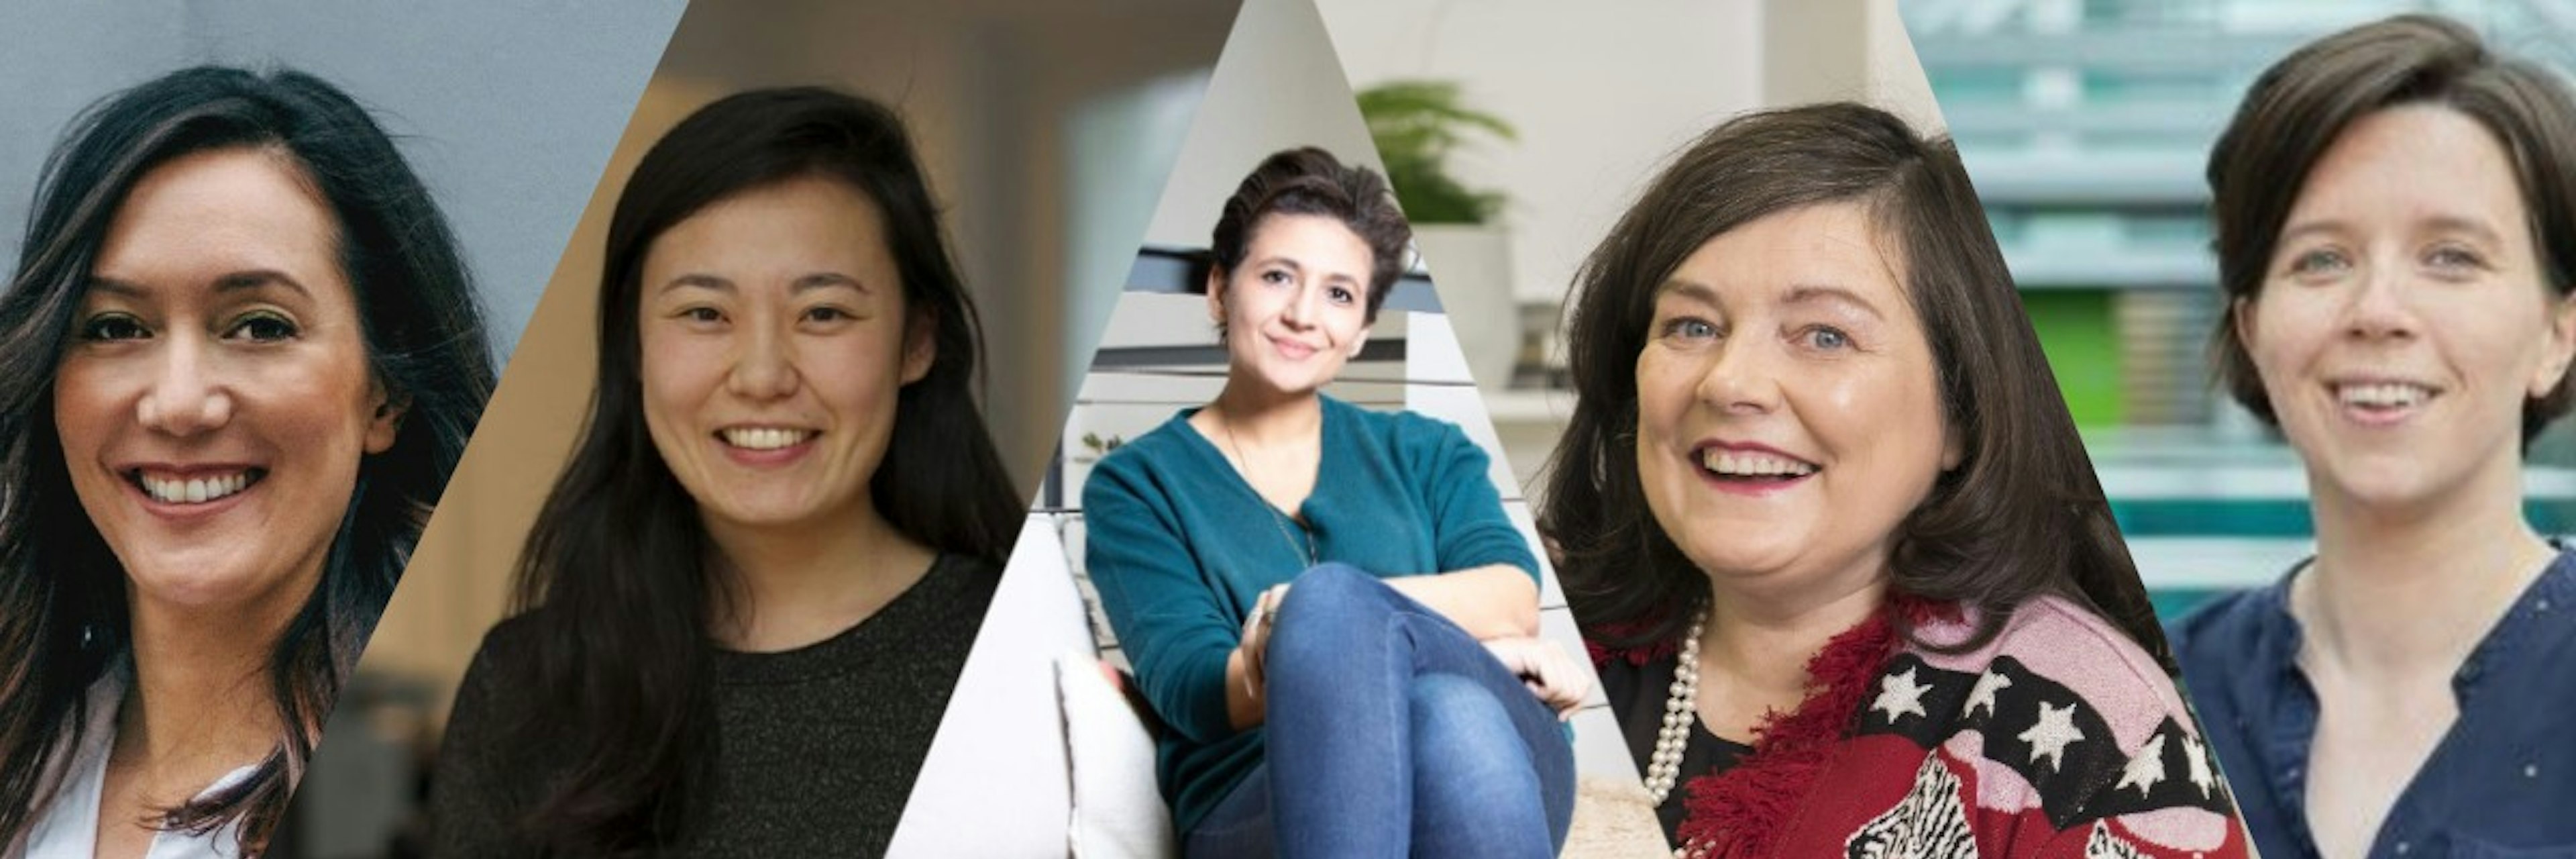 Female founders of fast growing startups in Europe.